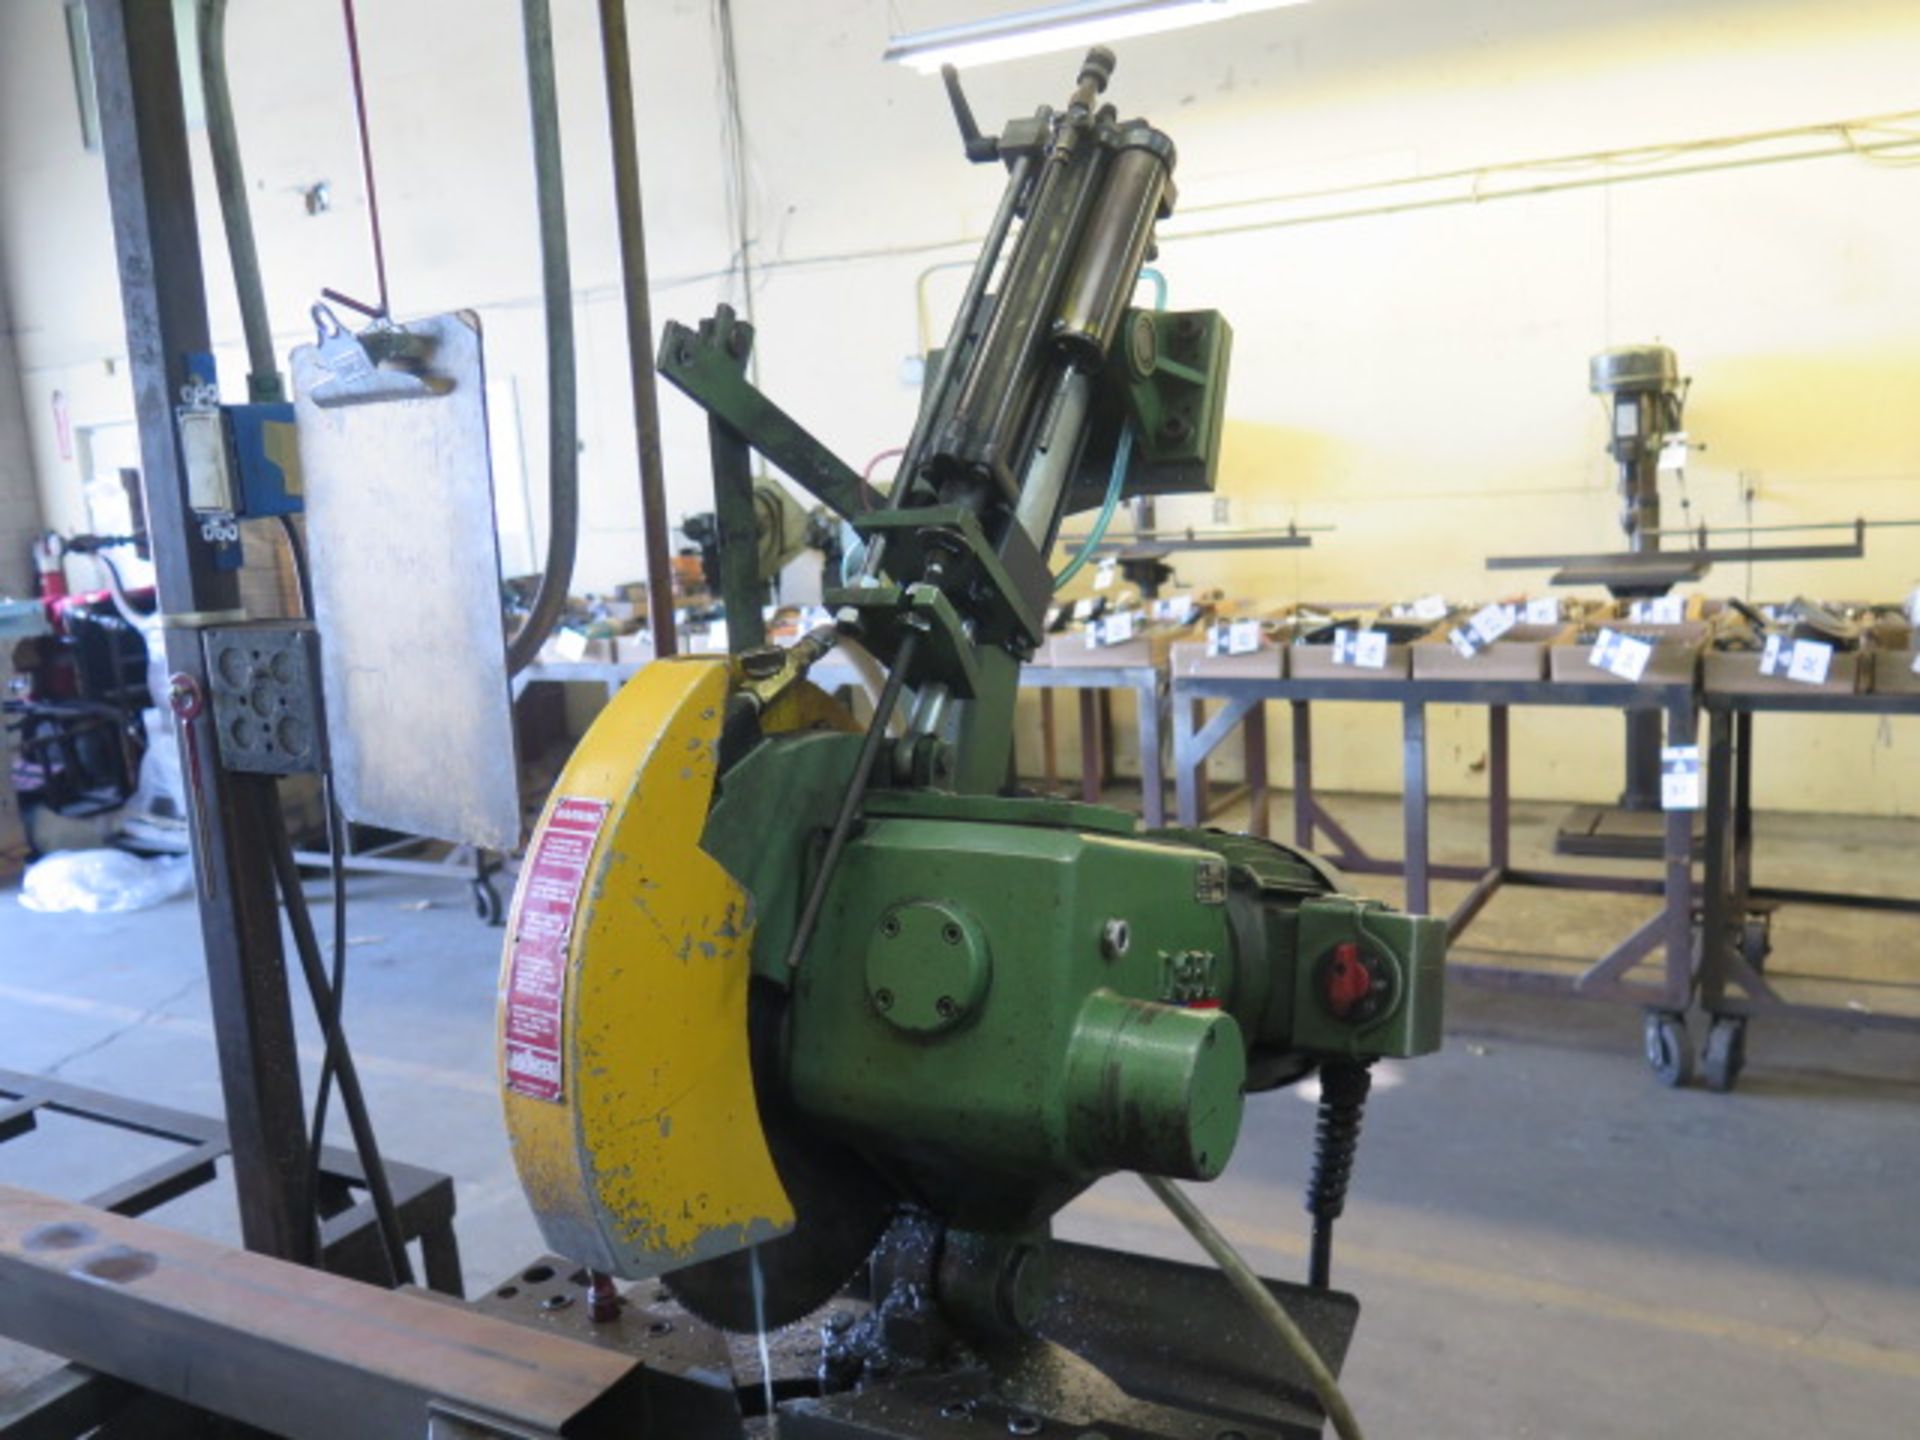 Doringer D350 Automatic Miter old Saw s/n 21998 w/ Pneumatic Clamping and Down Feed, 2-Speeds, - Image 2 of 8